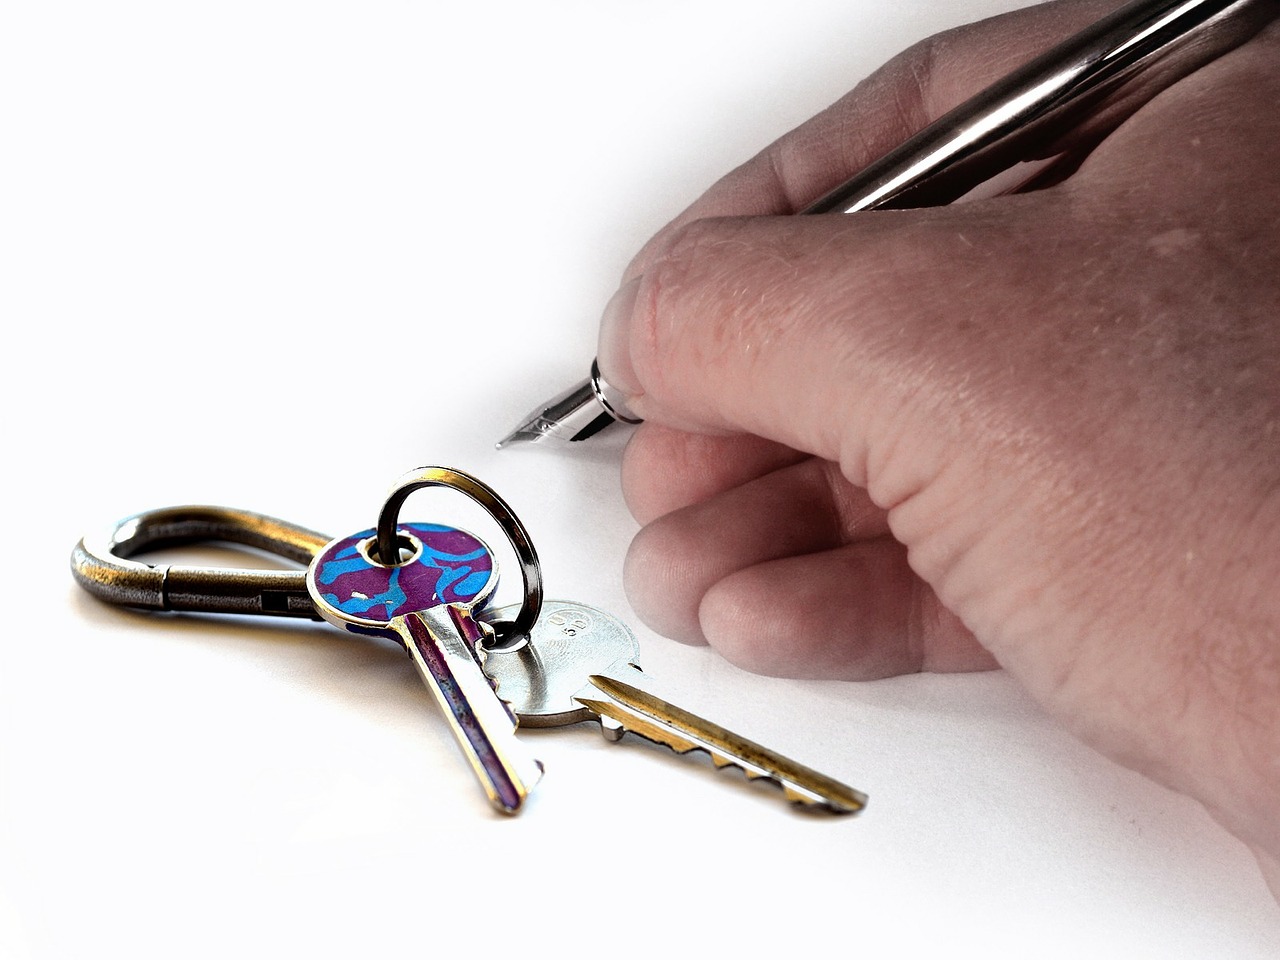 House keys next to a hand holding a pn writing on a document